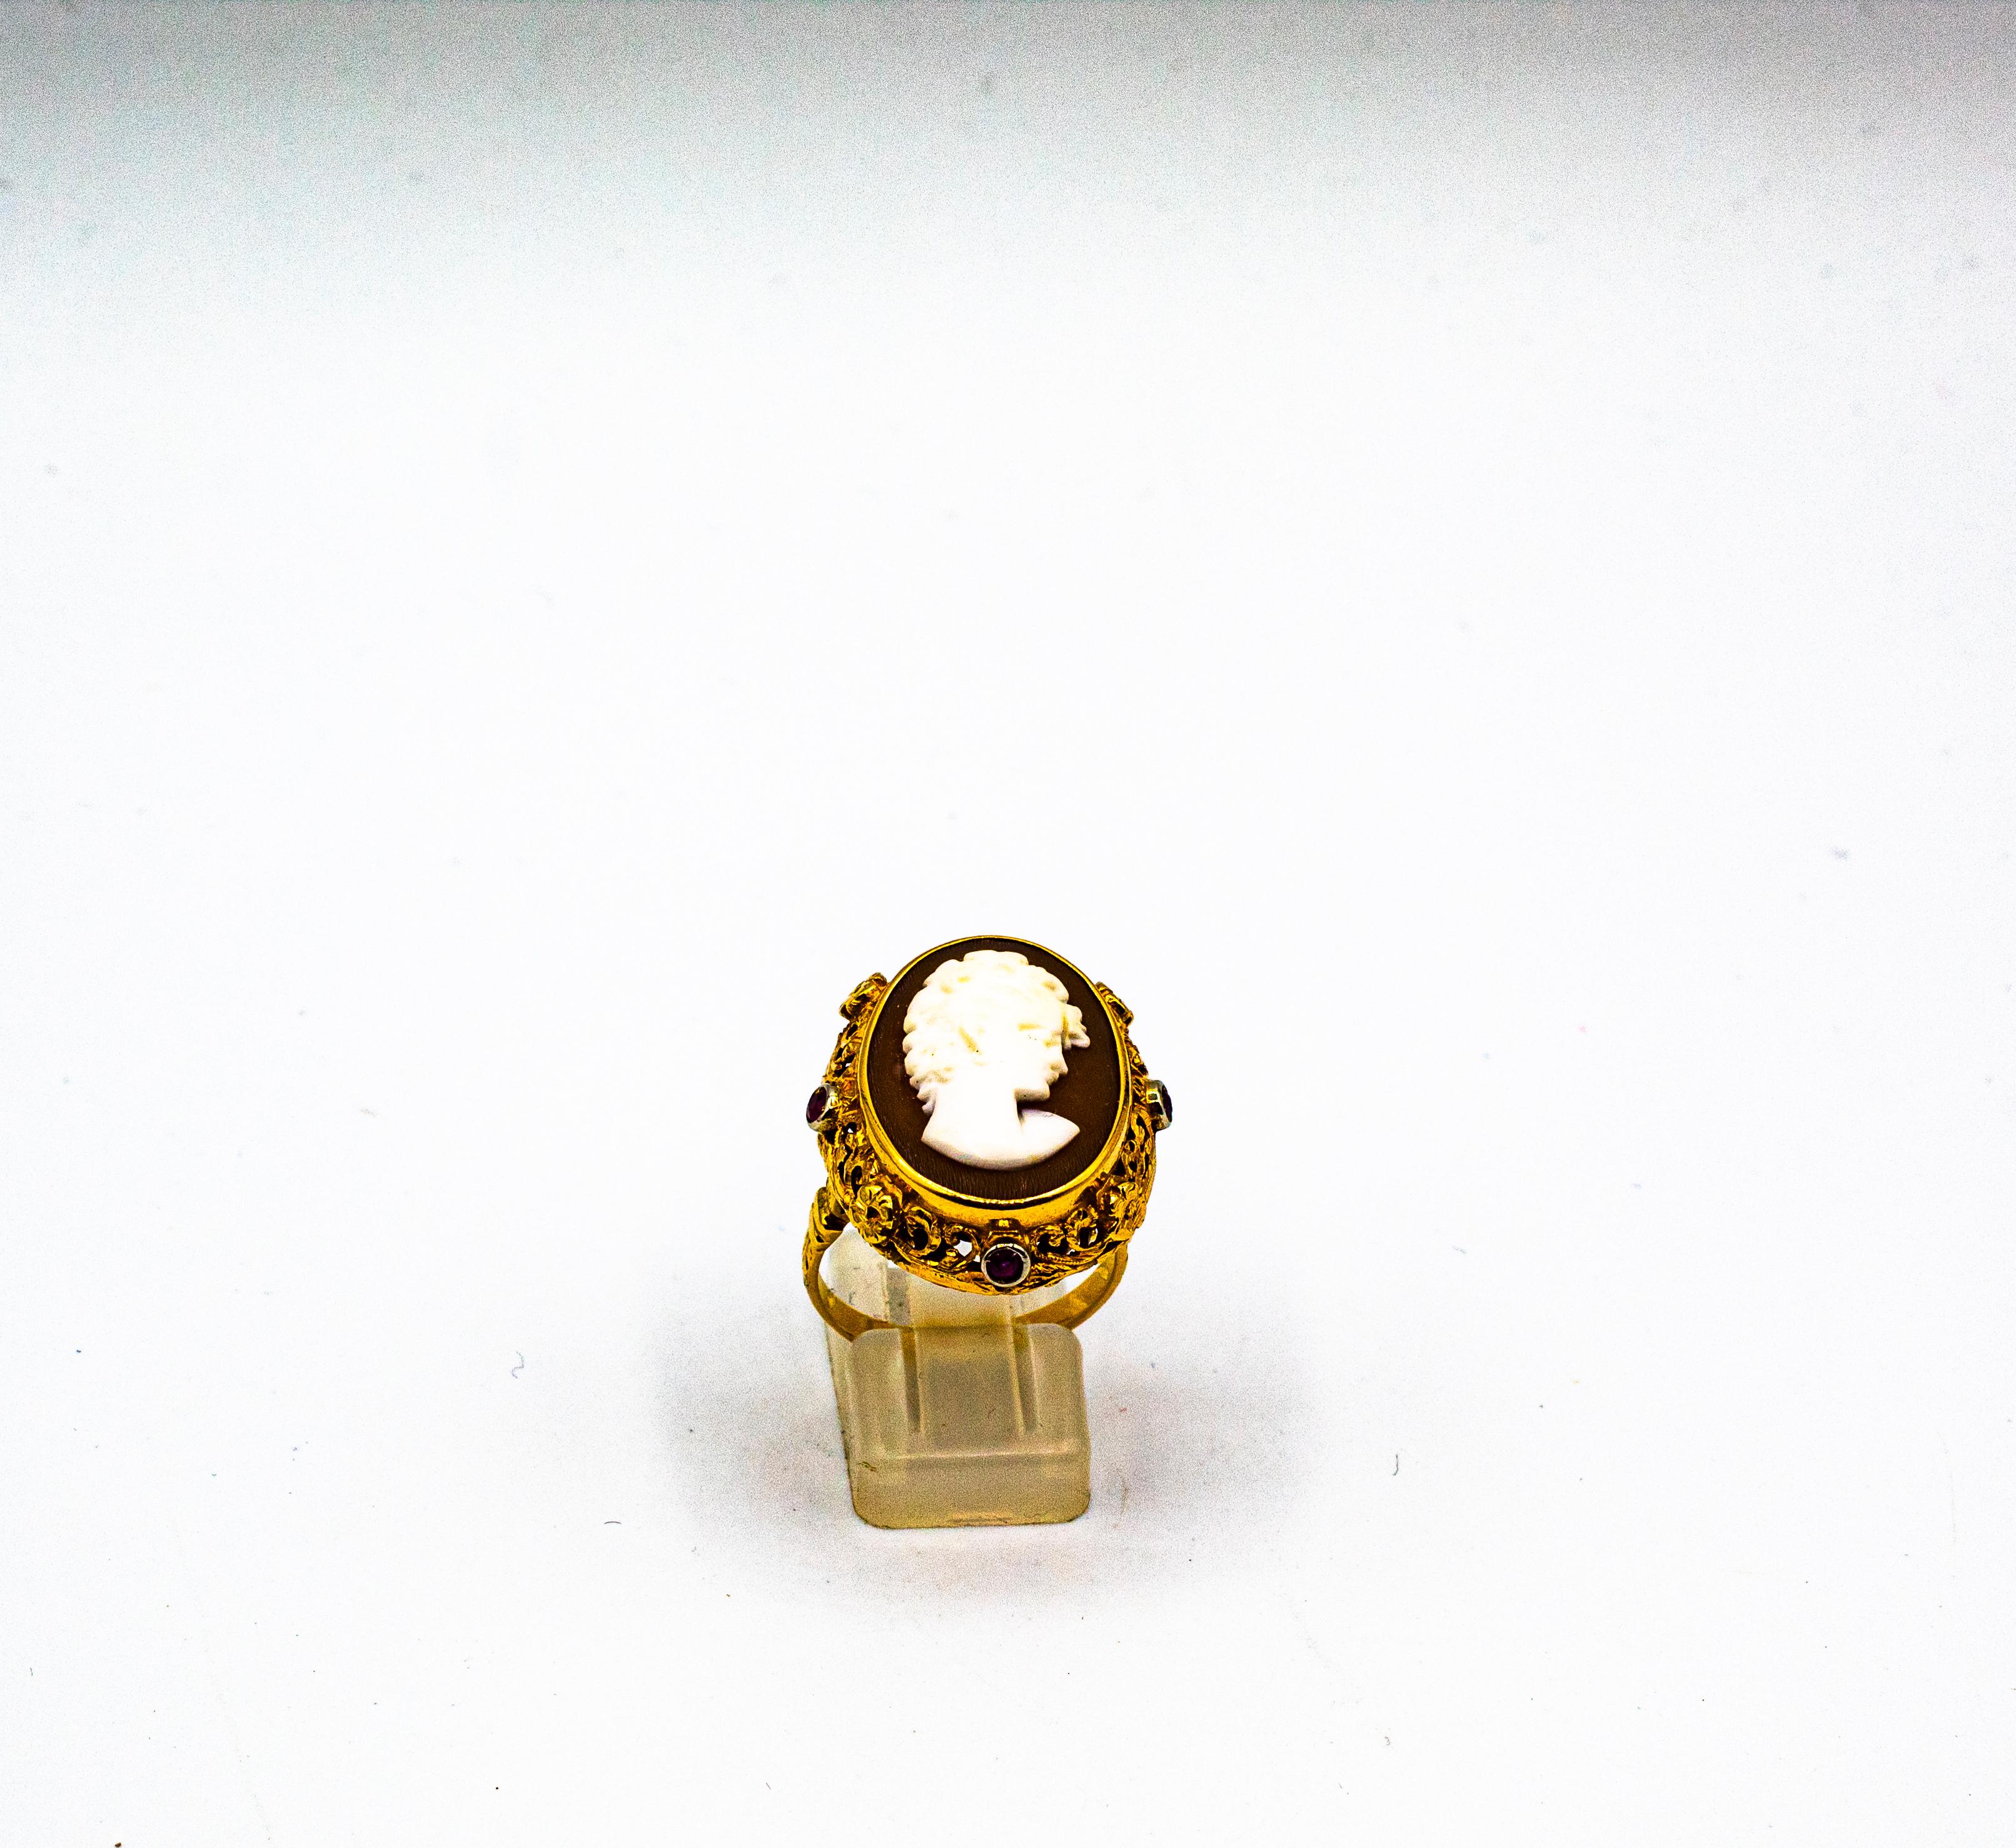 This Ring is made of 18K Yellow Gold.
This Ring has an Handcrafted Shell Cameo.
This Ring has 0.25 Carats of Rubies.

Size ITA: 18 USA: 8 1/4

We're a workshop so every piece is handmade, customizable and resizable.